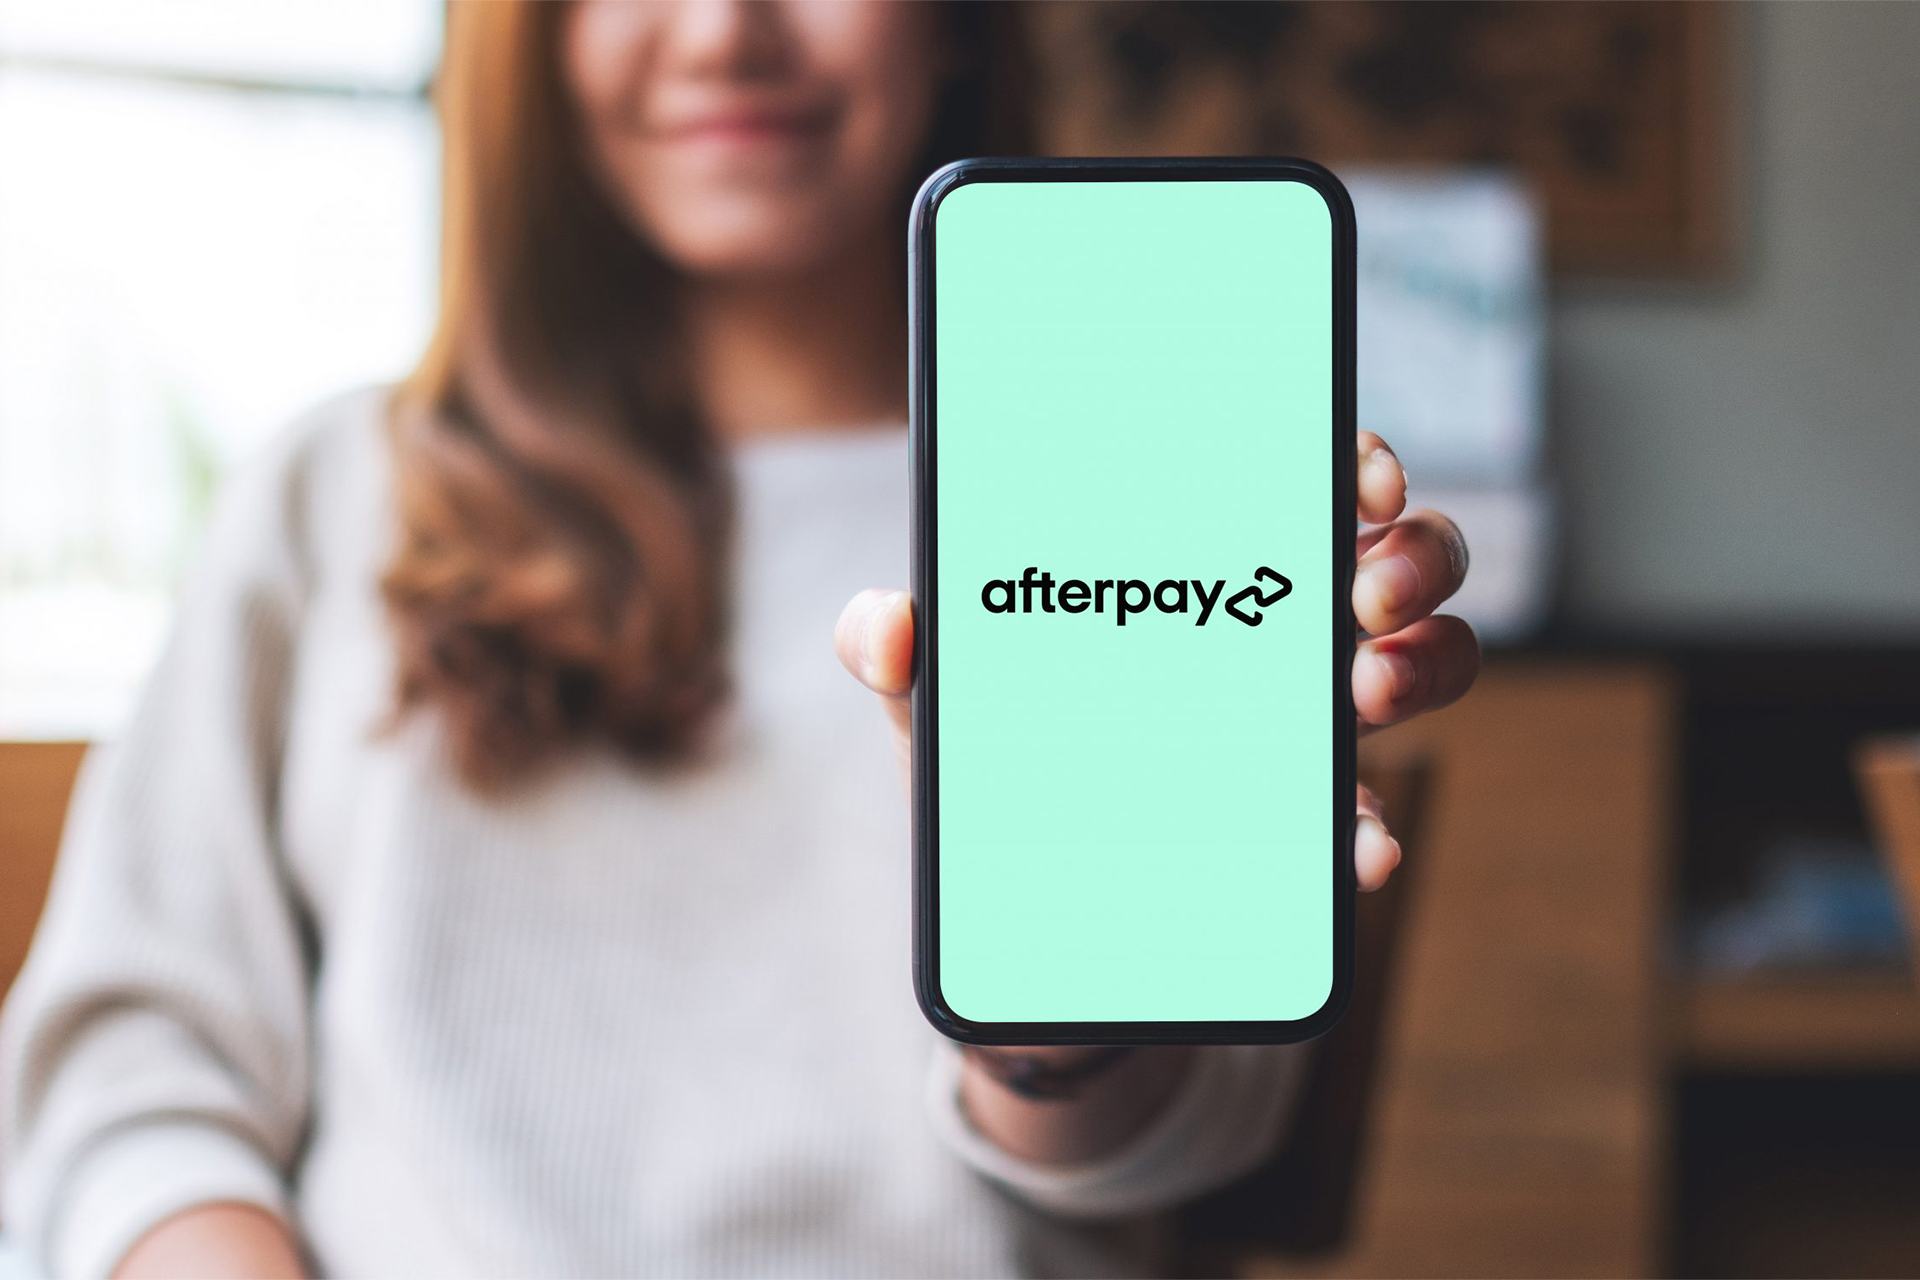 Afterpay Available, Buy Now Pay Later